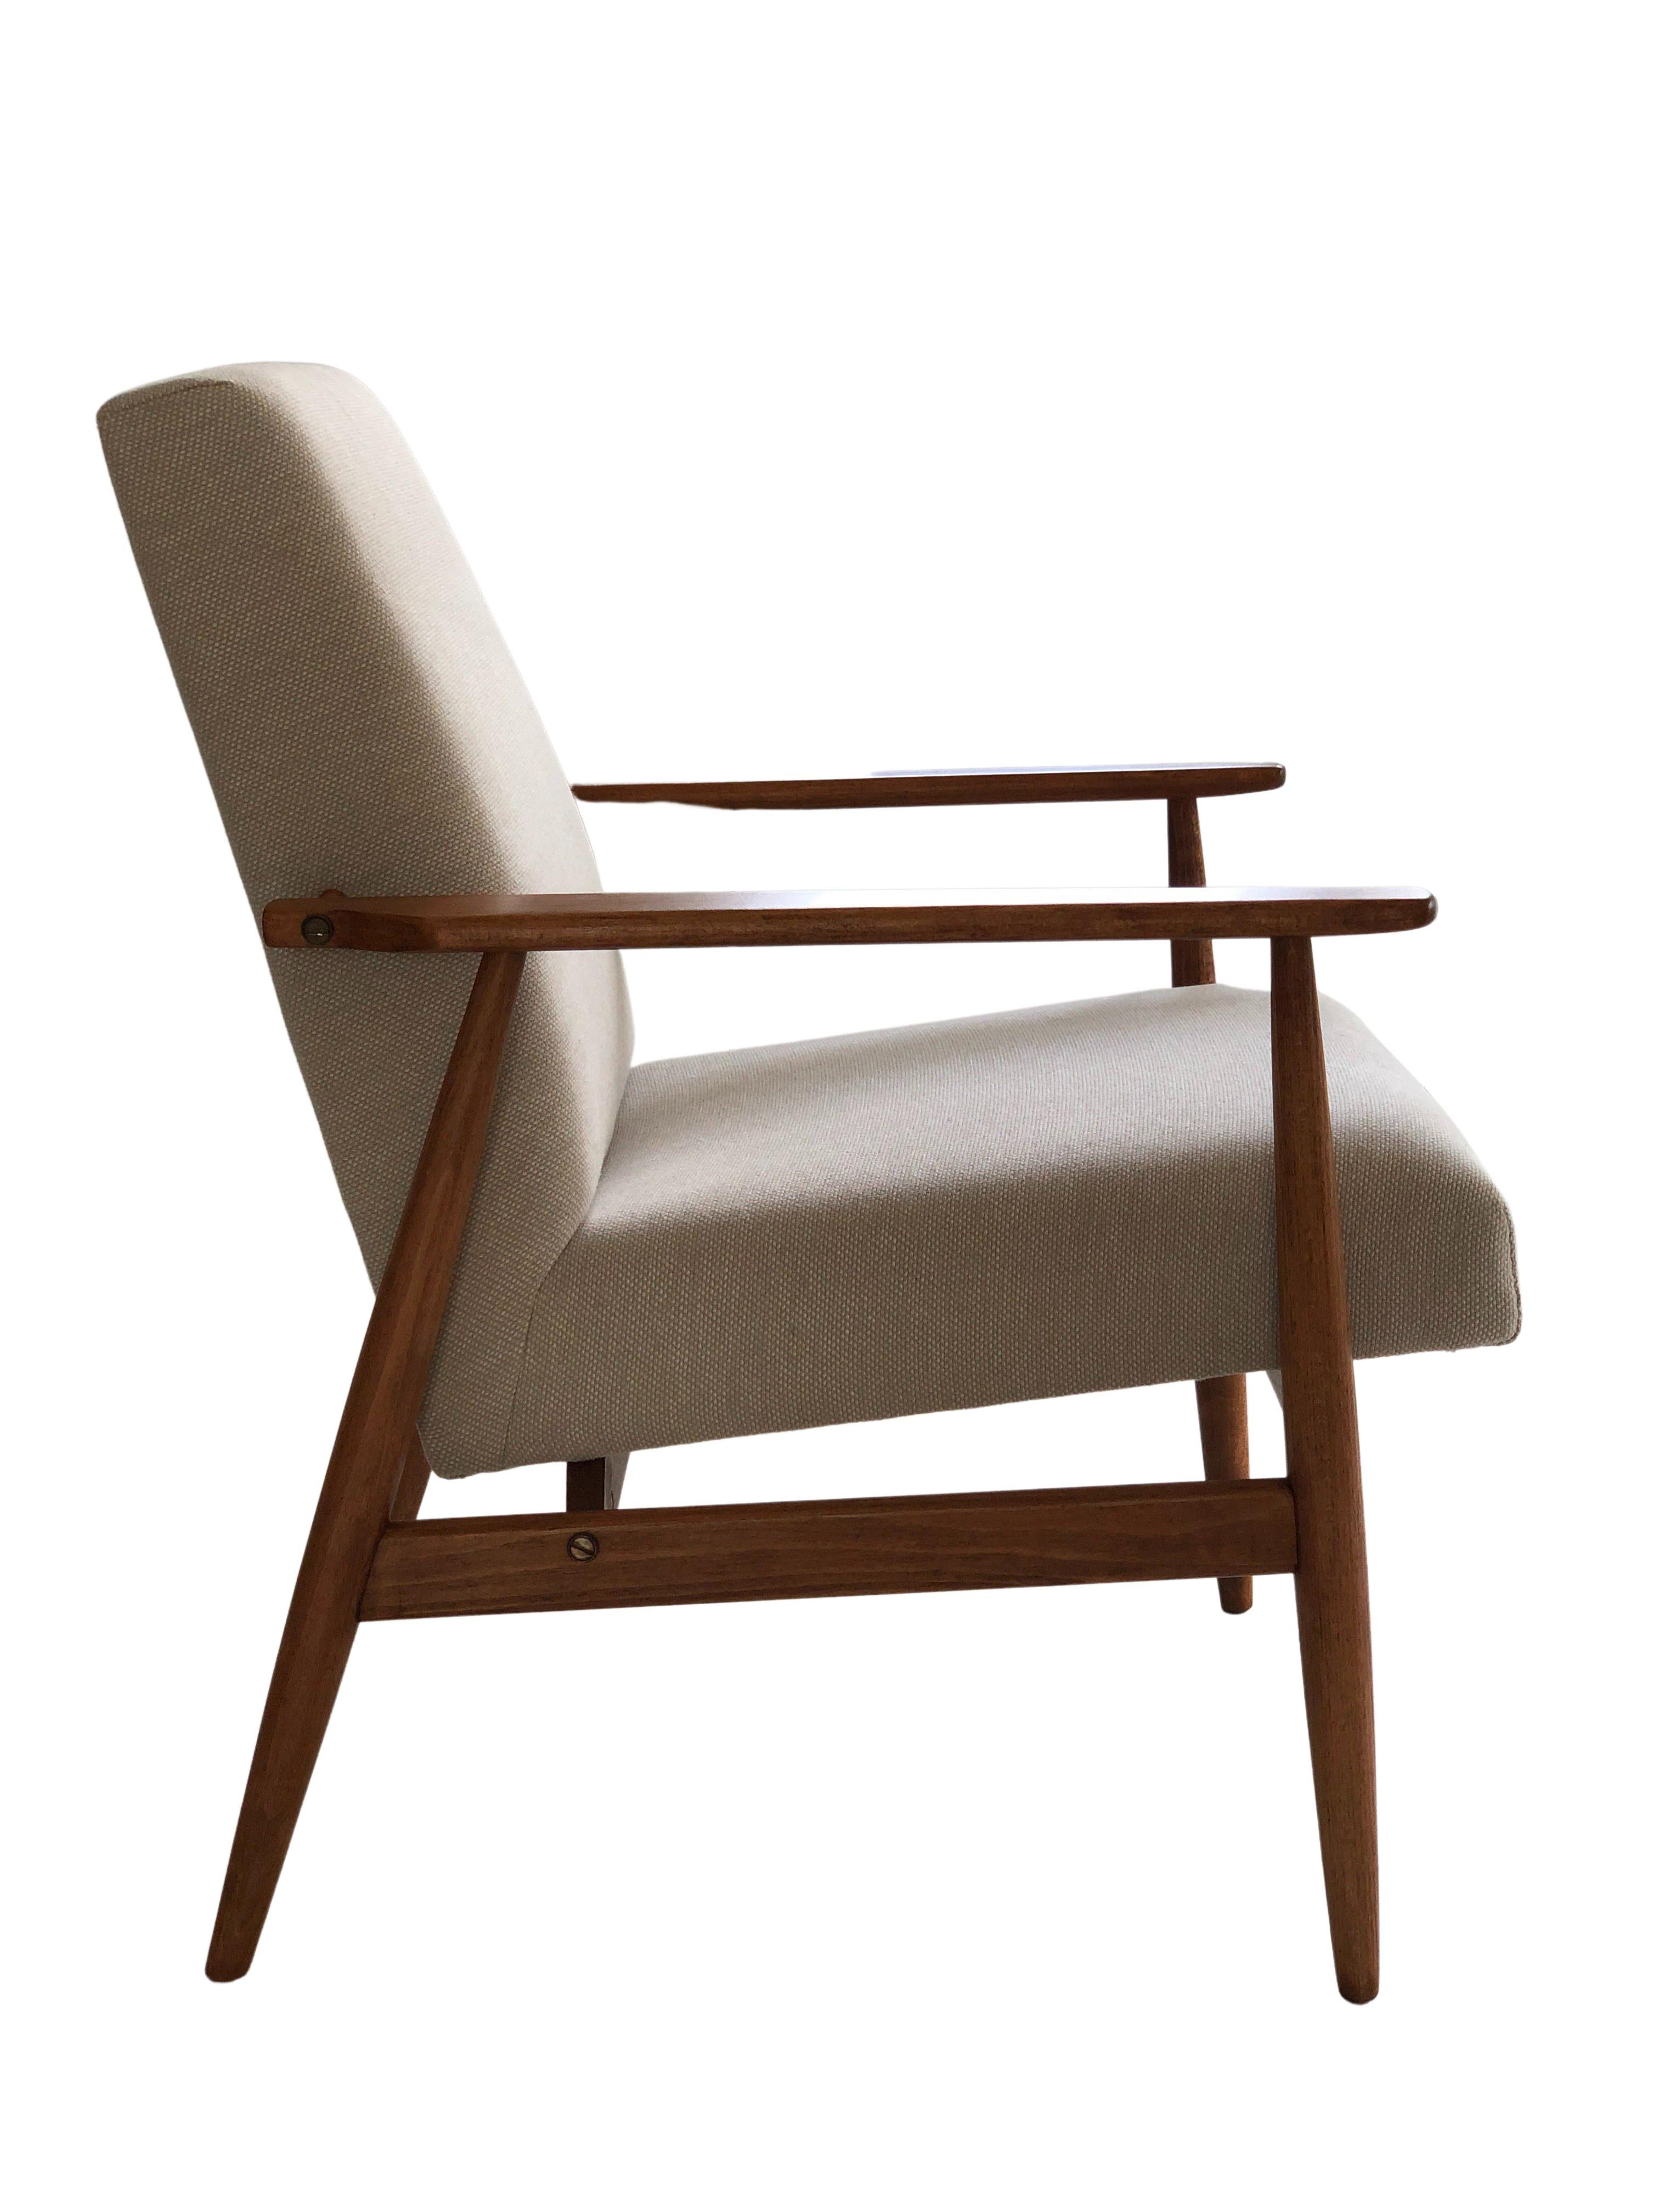 The armchair designed by Henryk Lis. The structure is made of beech wood in a warm walnut color, finished with a semi-matte satin varnish. The upholstery is heavy weight cotton and linen fabric in a beige color. 

The armchair has been completely